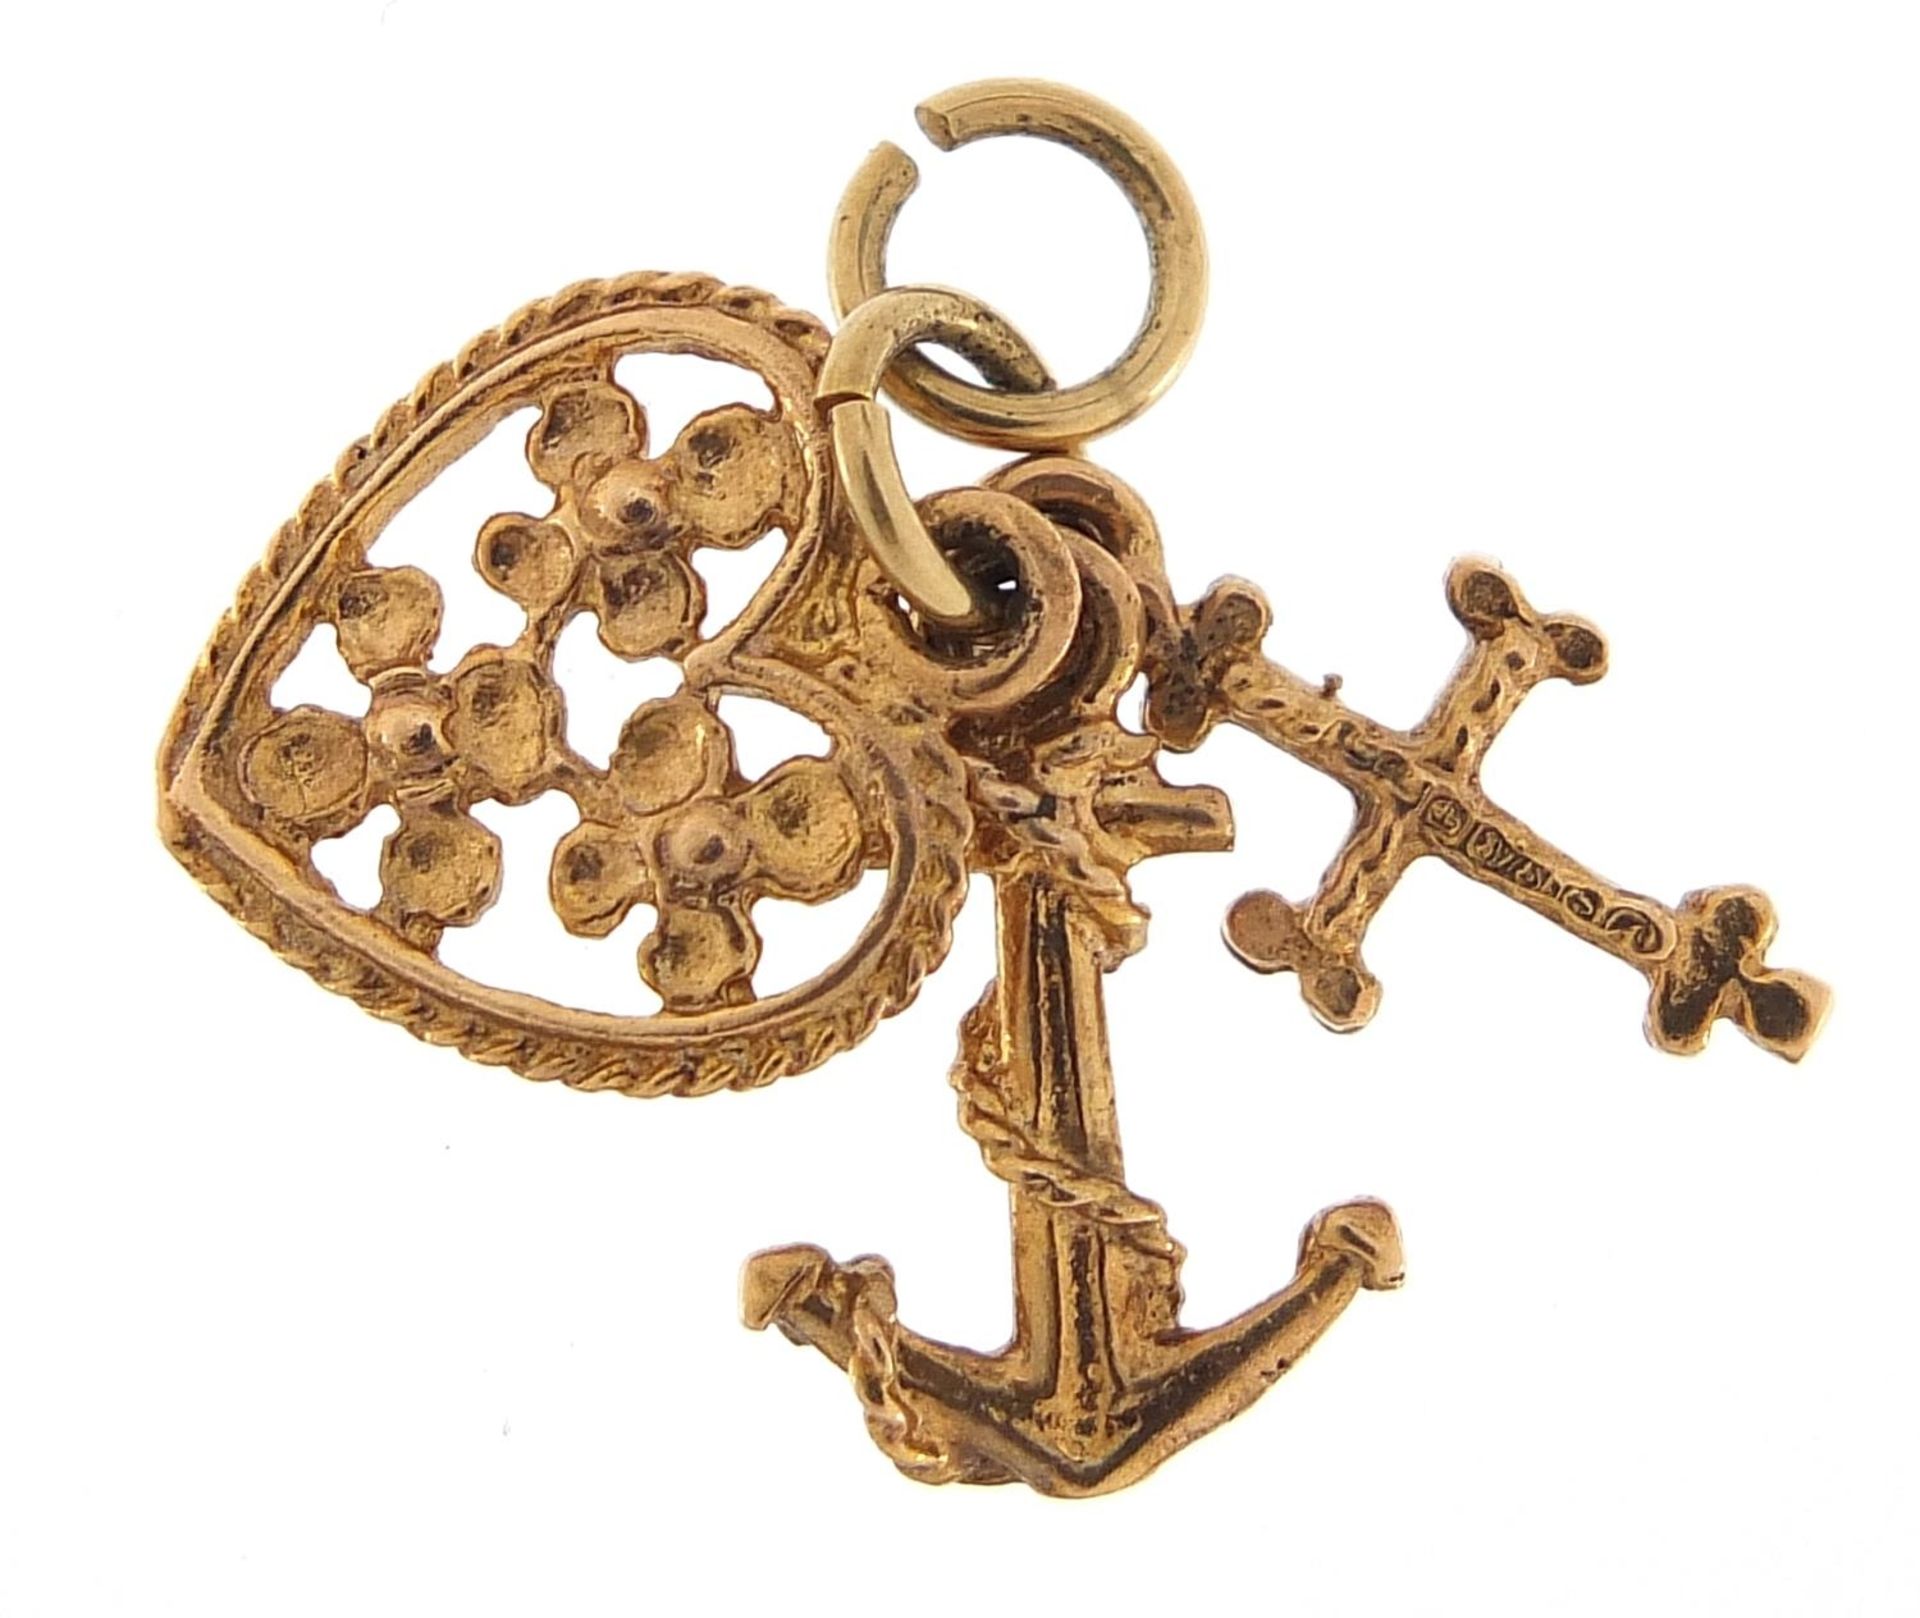 9ct gold faith, hope and charity charm, 2.5cm high, 1.5g - Image 2 of 3